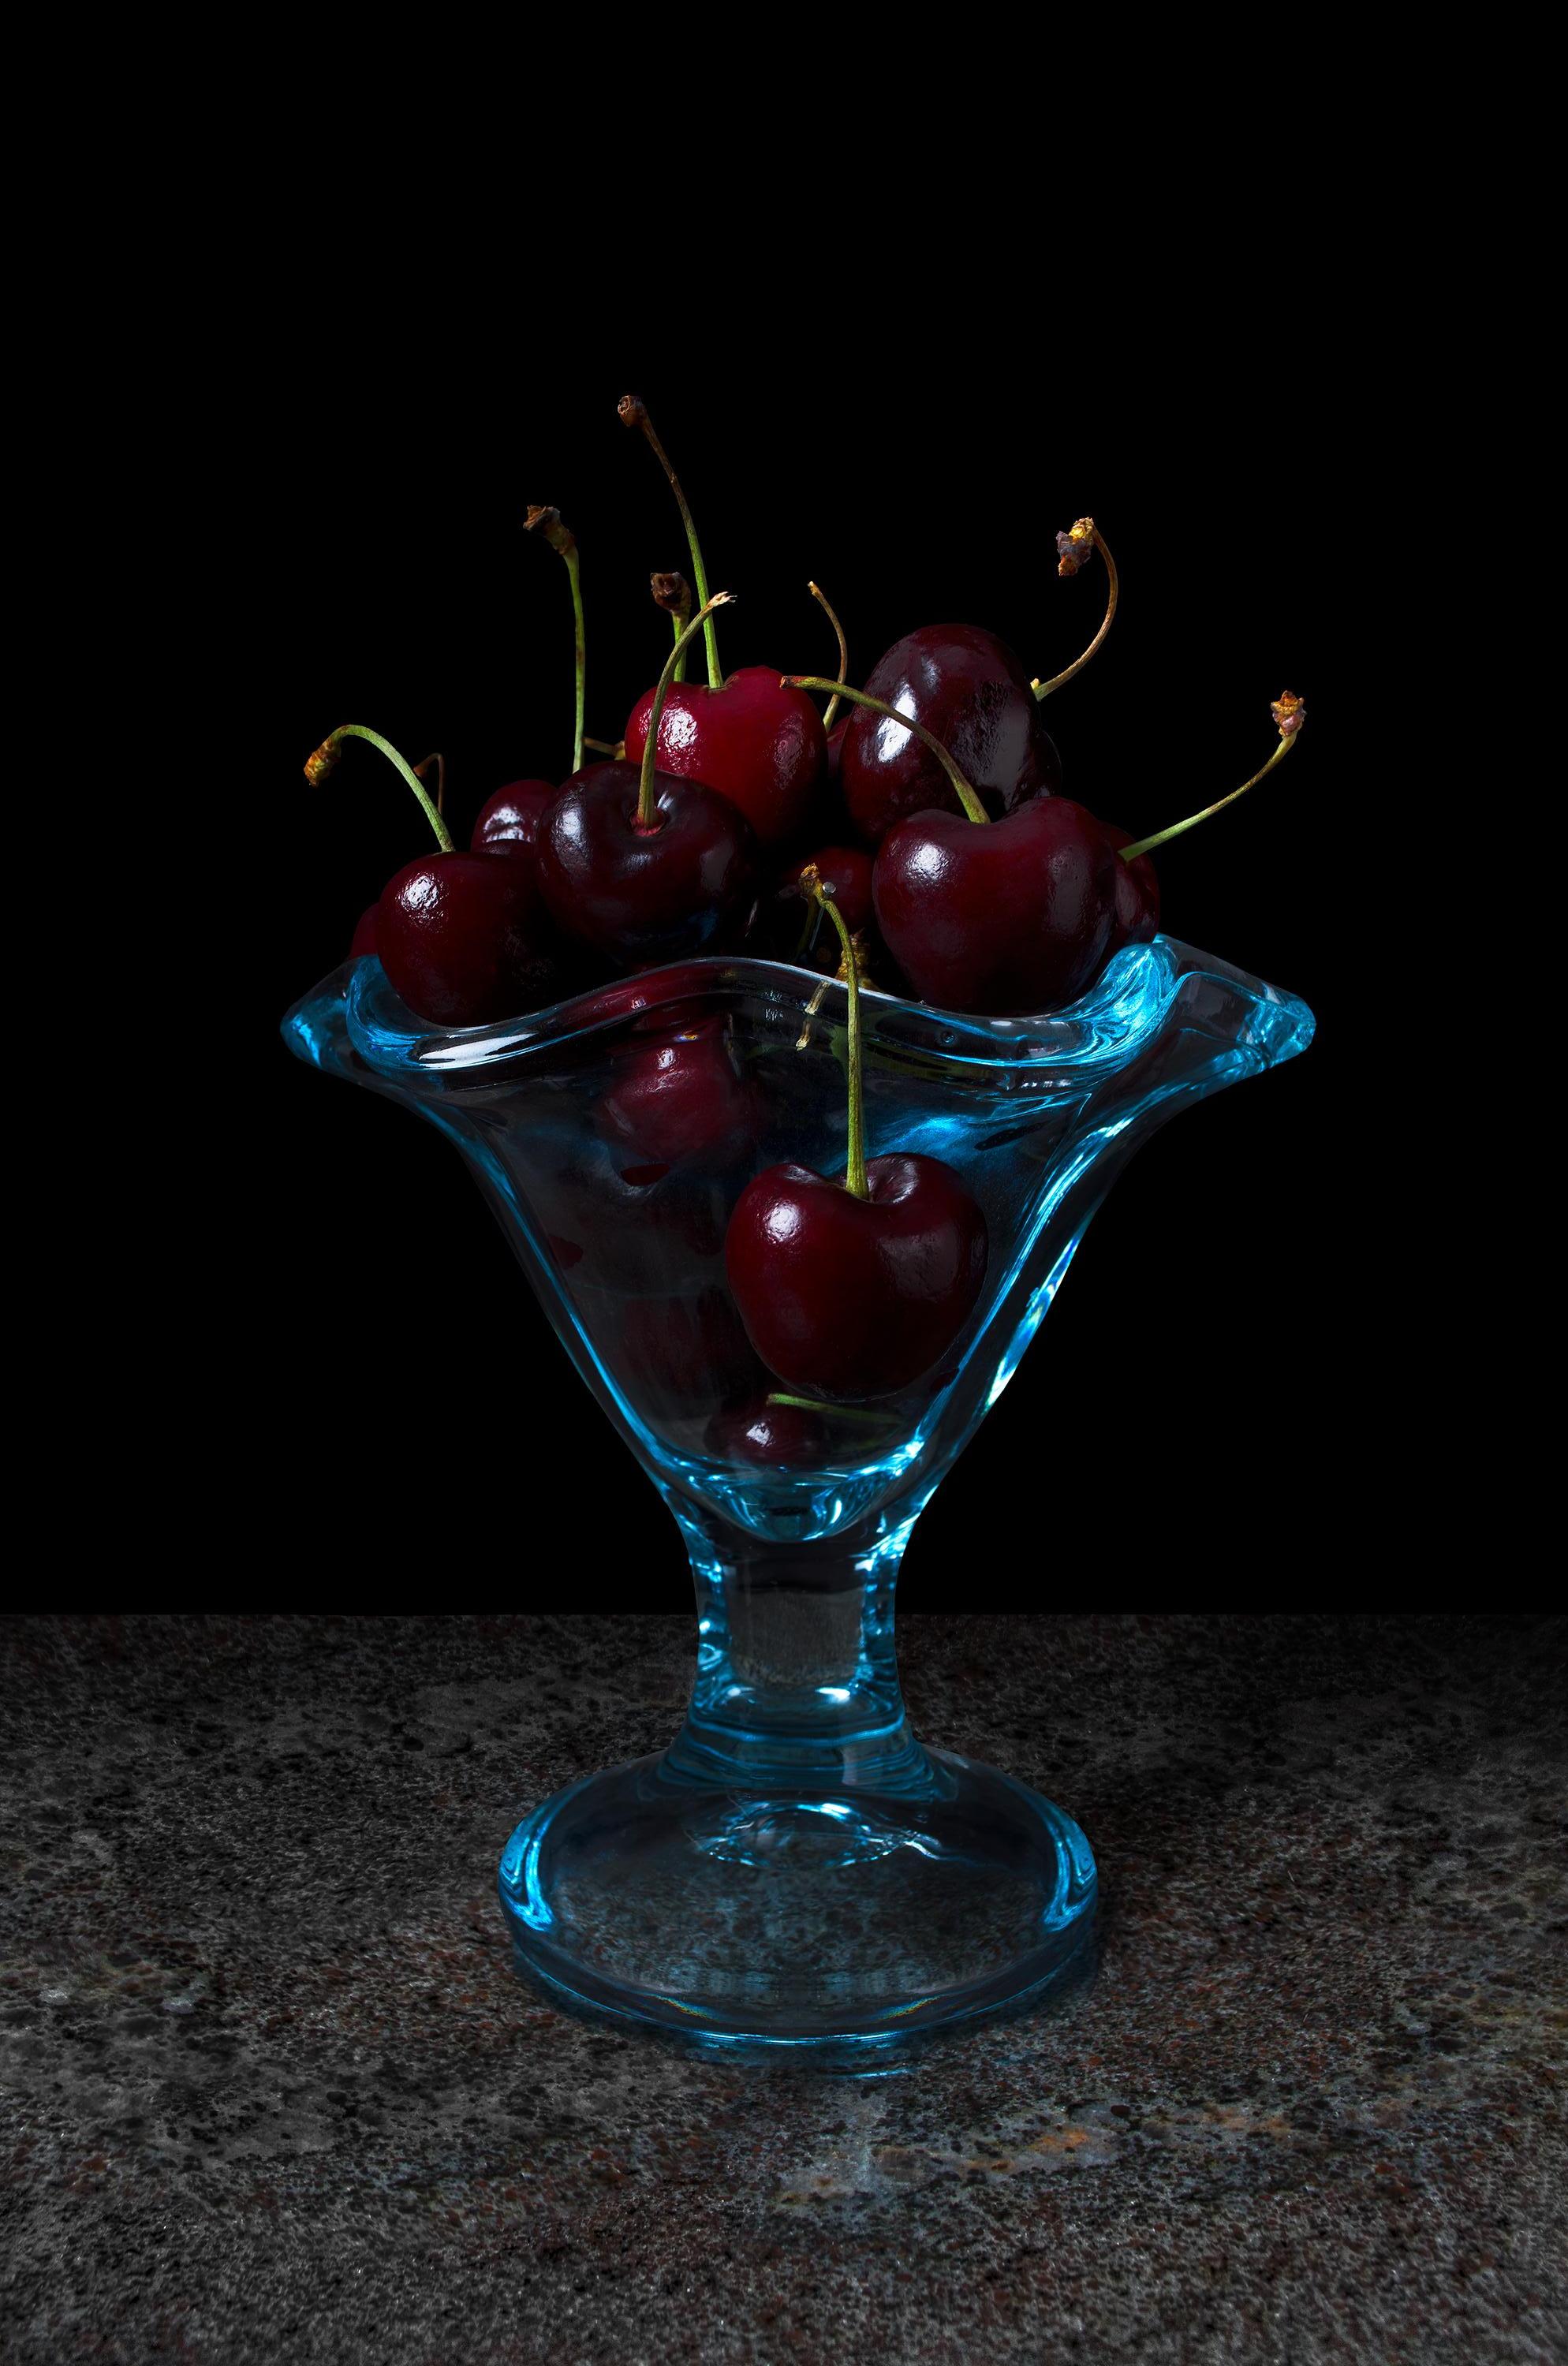 Dora Franco Color Photograph - Cerezas. From The Bodegones still life color photography  series